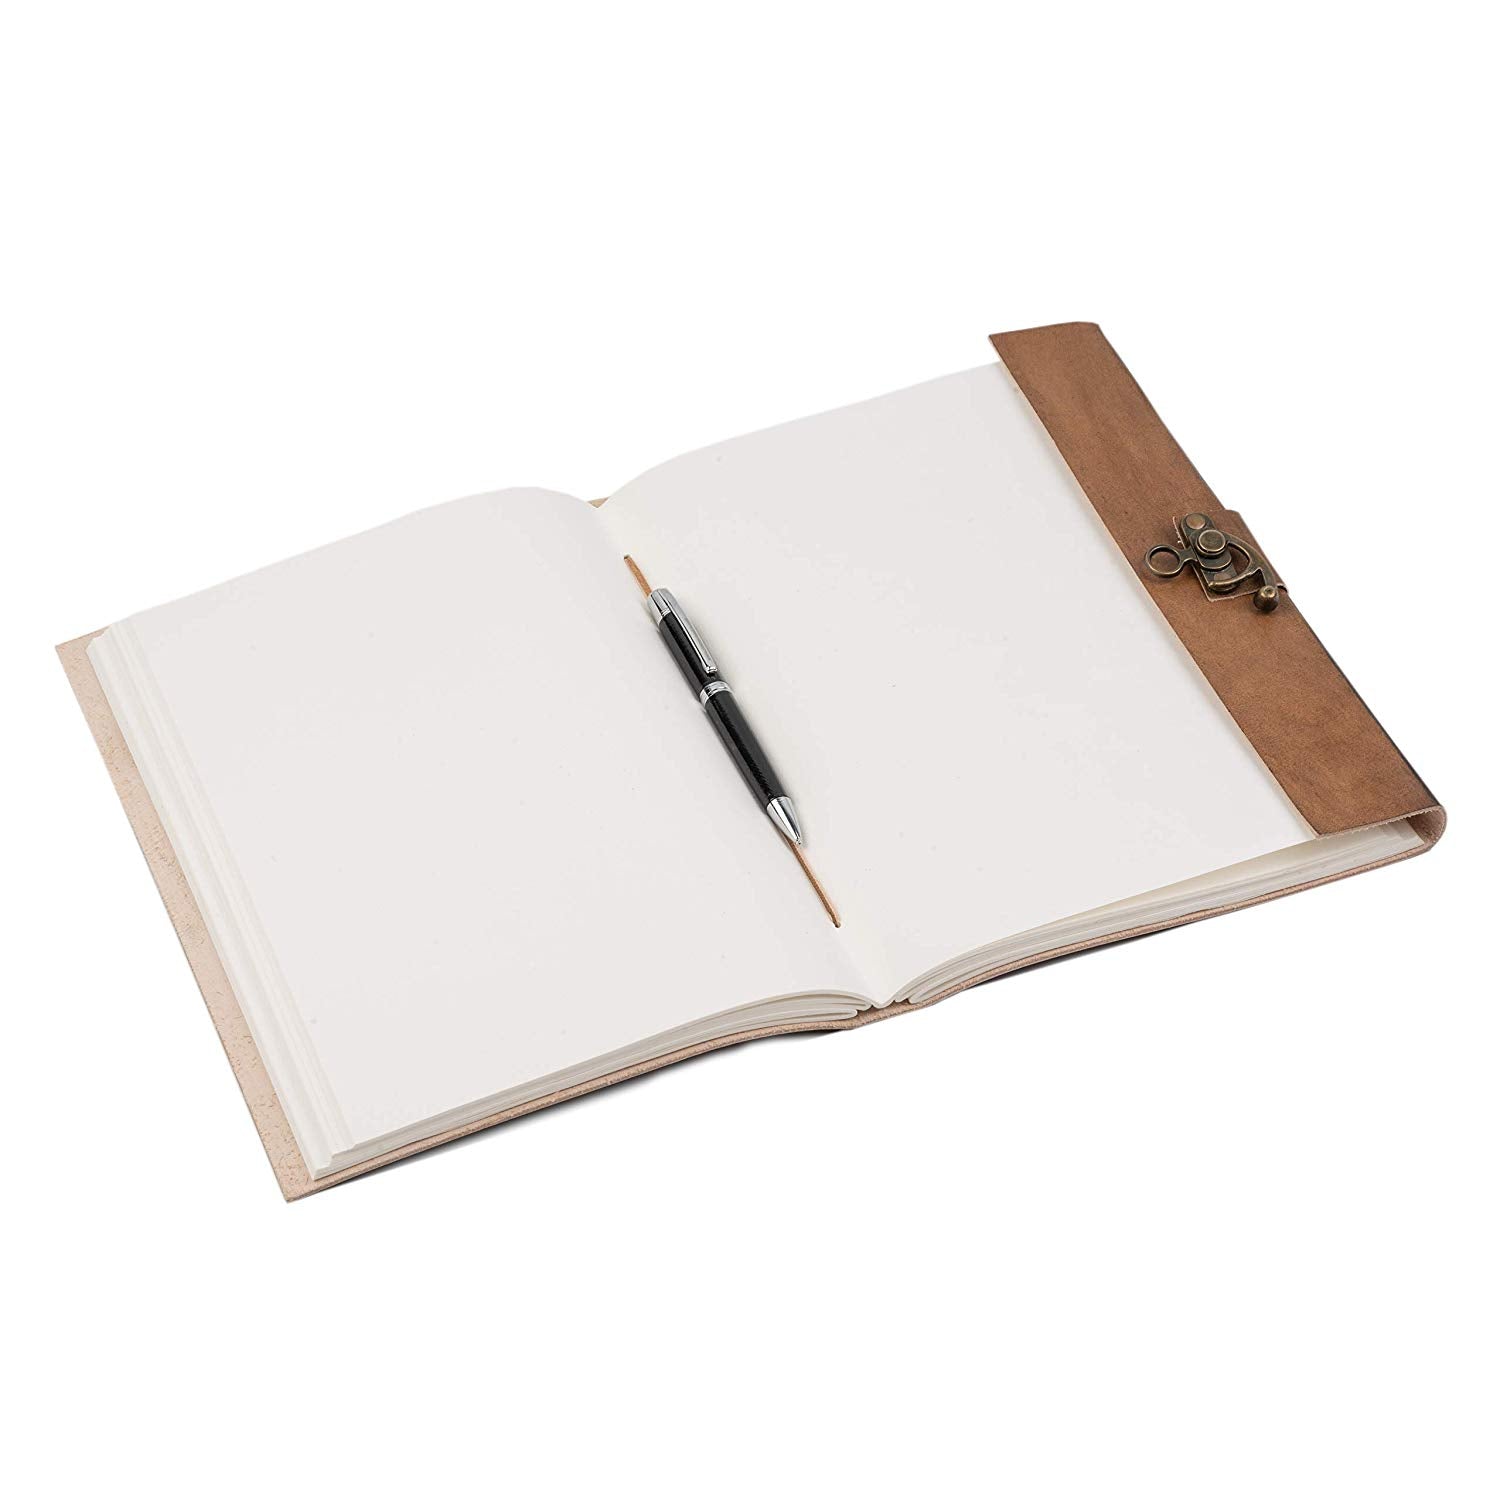 Open journal with recycled white cotton unlined pages